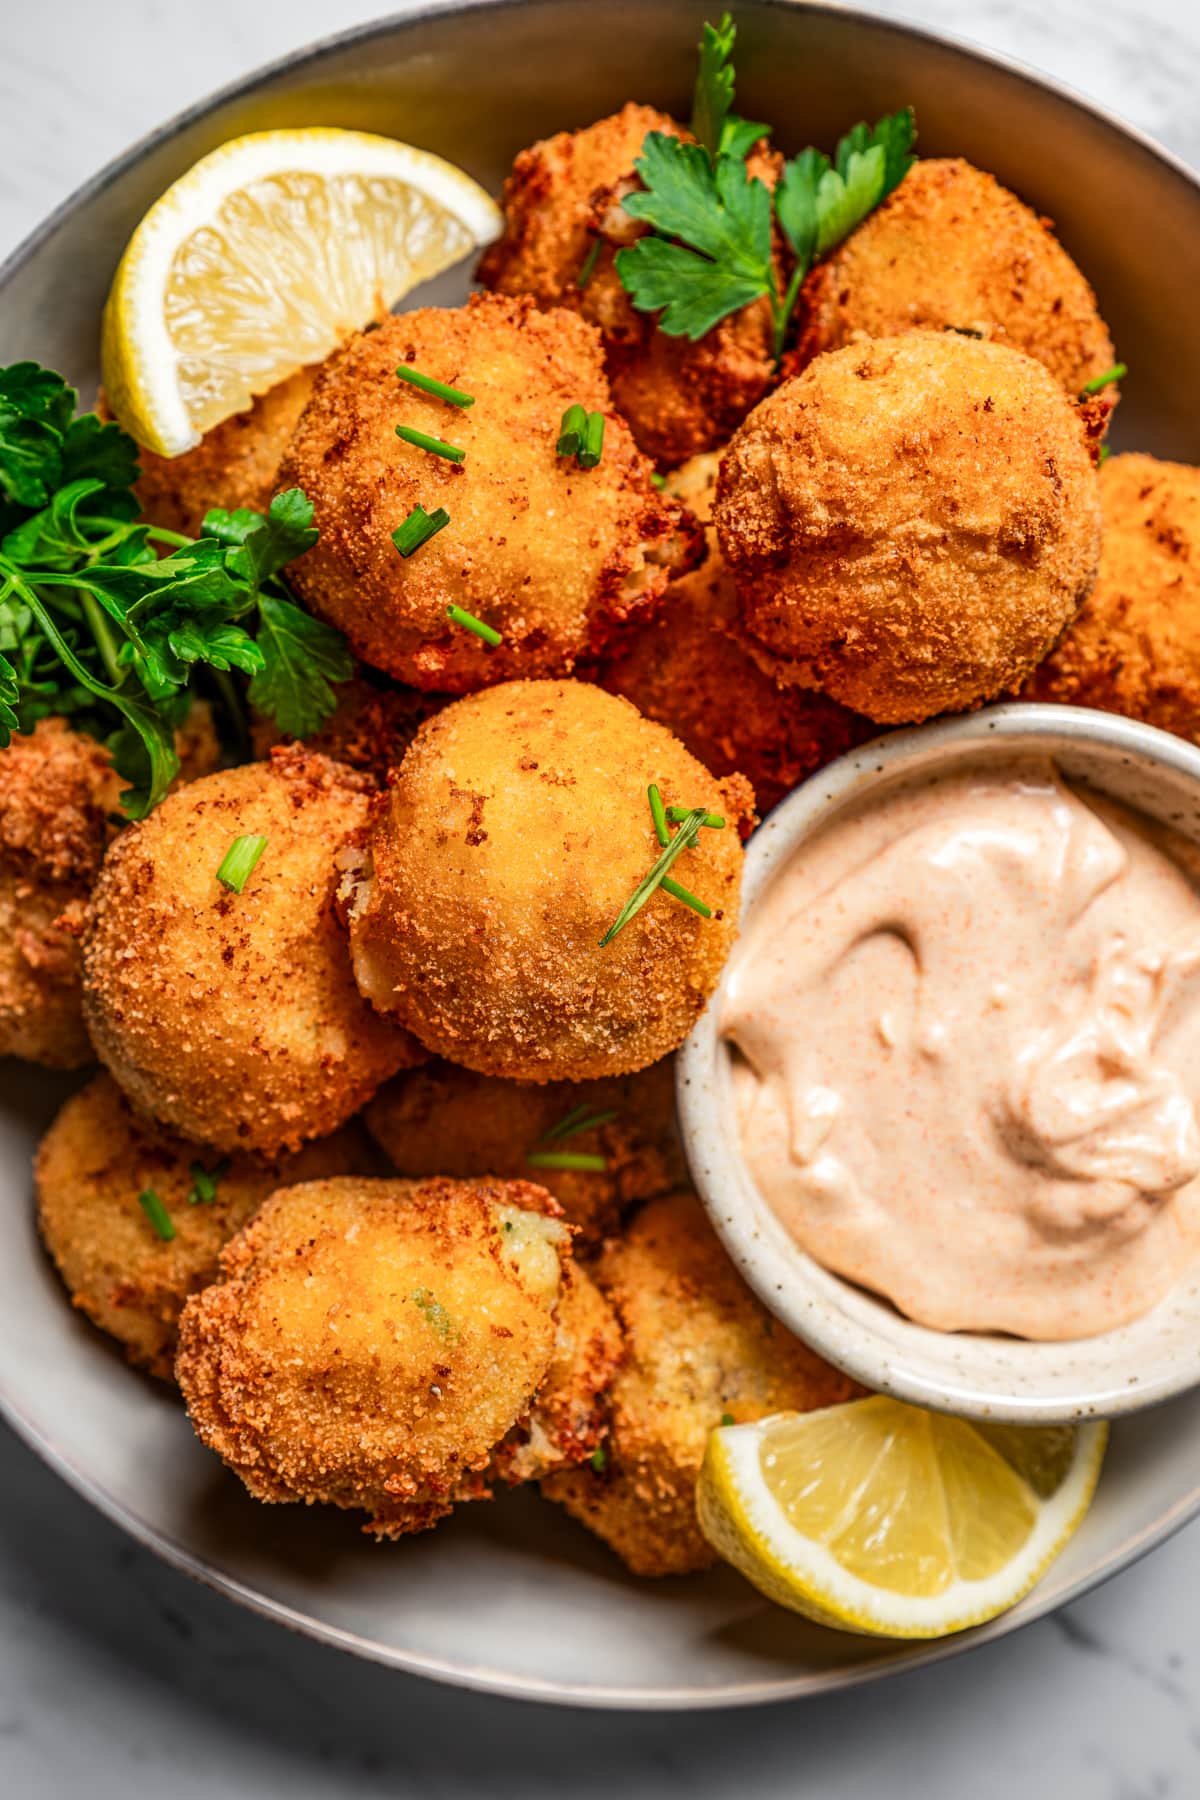 Close-up image of potato croquettes served in a bowl with garlic aioli and lemon wedges.